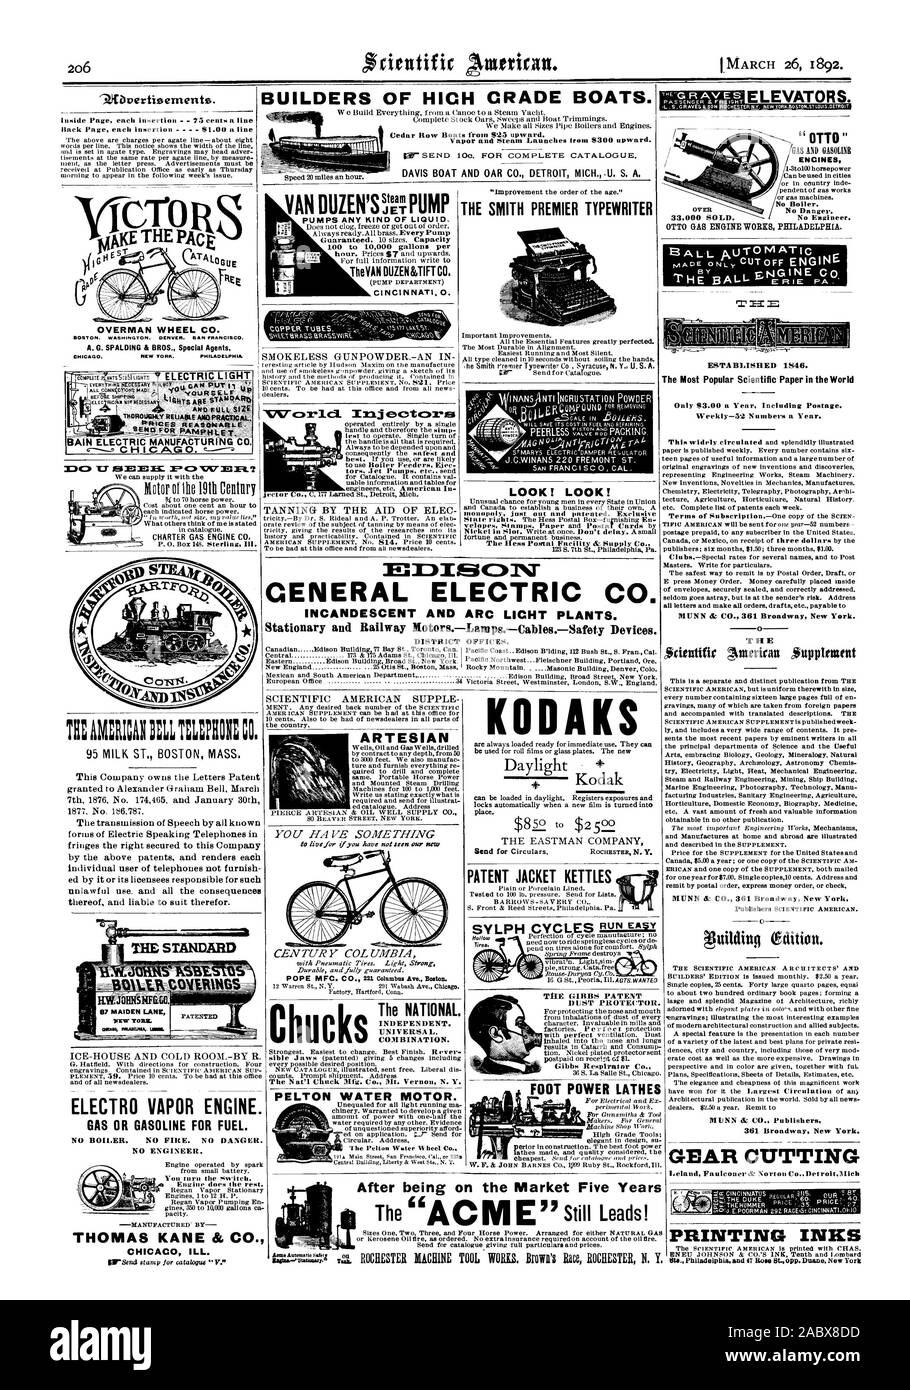 OVERMAN WHEEL CO. BOSTON. WASHINGTON. DENVER. SAN FRANCISCO. A. 0. SPALDING & BROS. Special Agents CHICAGO. NEW YORK. PHILADELPHIA. ELECTRO VAPOR ENGINE. GAS OR GASOLINE FOR FUEL. NO ENGINEER. THOMAS KANE eir C CHICAG ILL. ARTESIAN MG; PRIABRAIL. MAIL Chuc UNIVERSAL. COMBINATION. The NATIONAL. WCTORS PELTON WATER MOTOR. Tudr. SERSHWd'GODOIW ' OTTO' ELEVATORS. KODAK place. PATENT JACKET KETTLES SYLPH CYCLES --I RUN EA Y FOOT POWER LATHES VIE GIBBS PATENT DUST PROTECTOR. Gibbs Respirator Co. T13 EKTABLISHED 1846. The Most Popular Scientific Paper in the World Weekly-5'2 Numbers a Year. 0 T H E Stock Photo